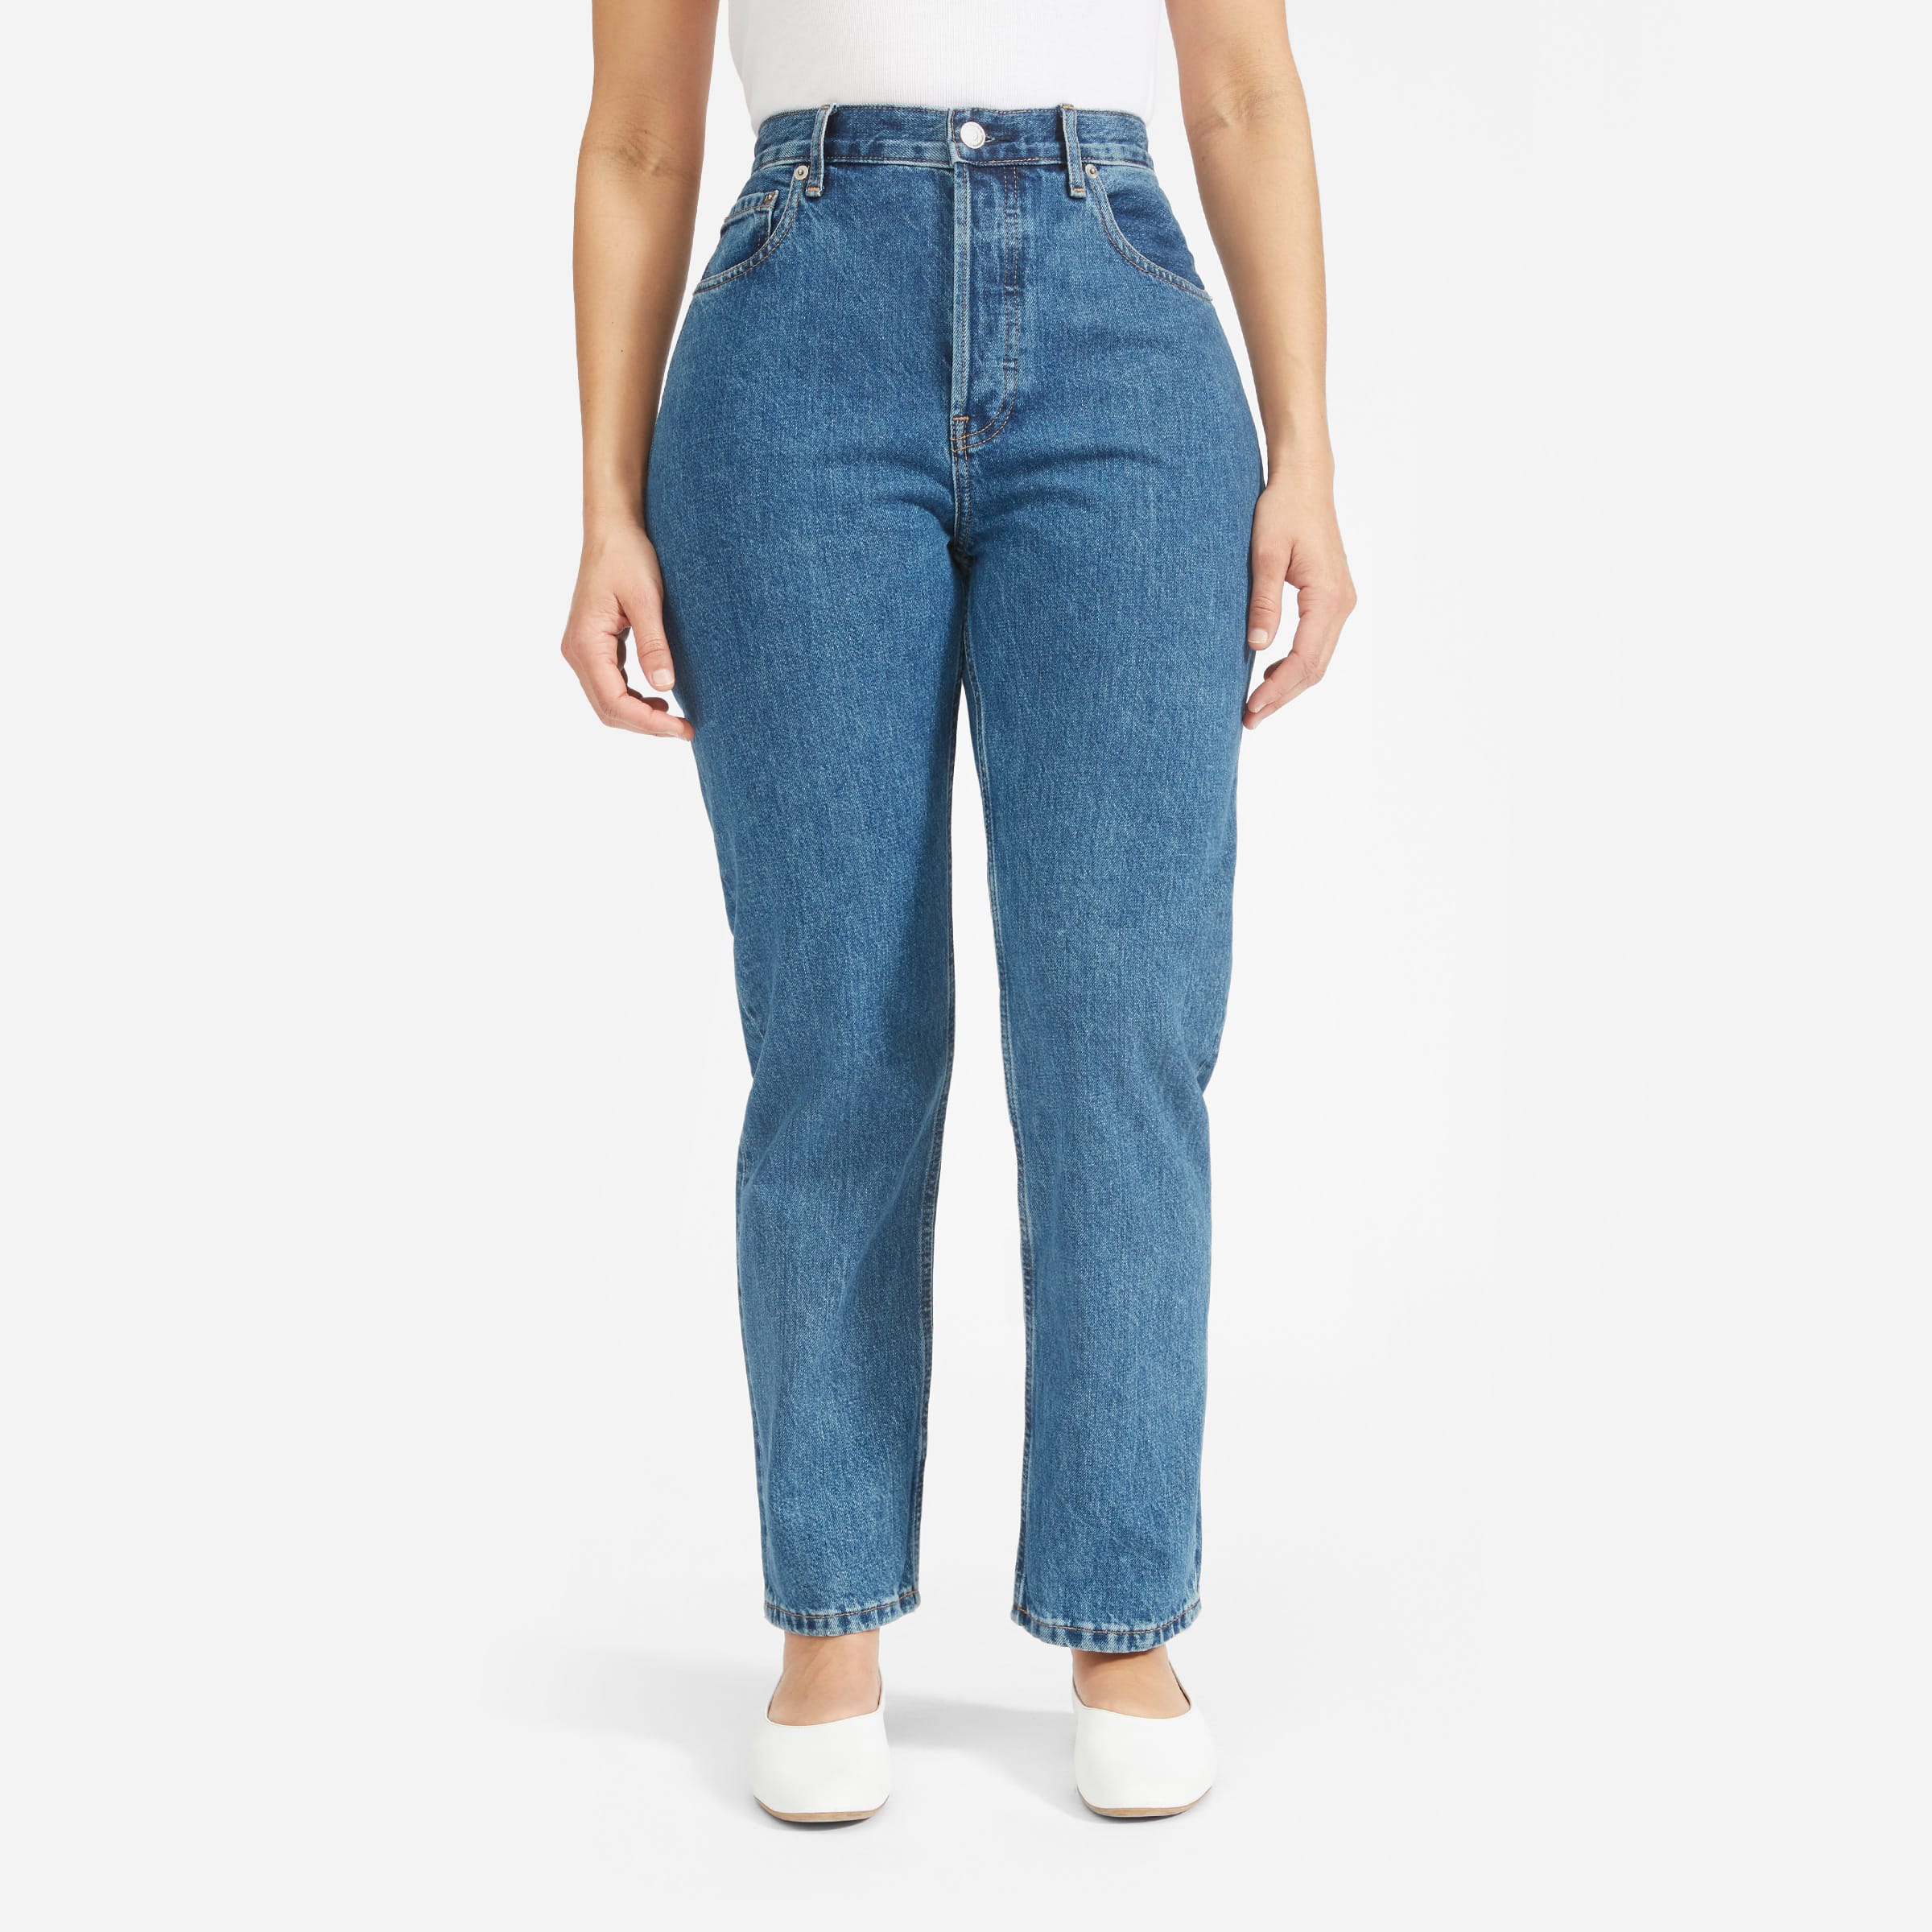 14 Best Pairs of Non-Stretch Jeans 2023 | Well+Good